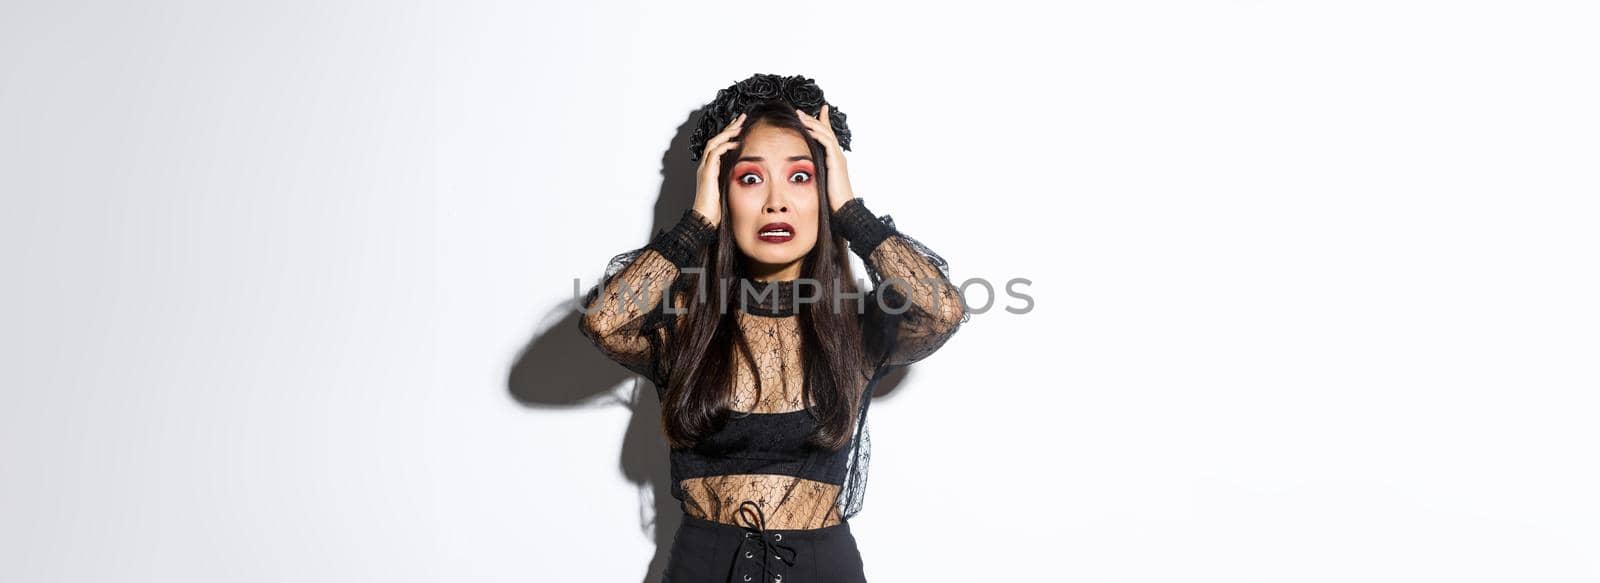 Image of scared and worried asian woman in halloween costume looking horrified or anxious, holding hands on head and stare at camera, panicking over white background.